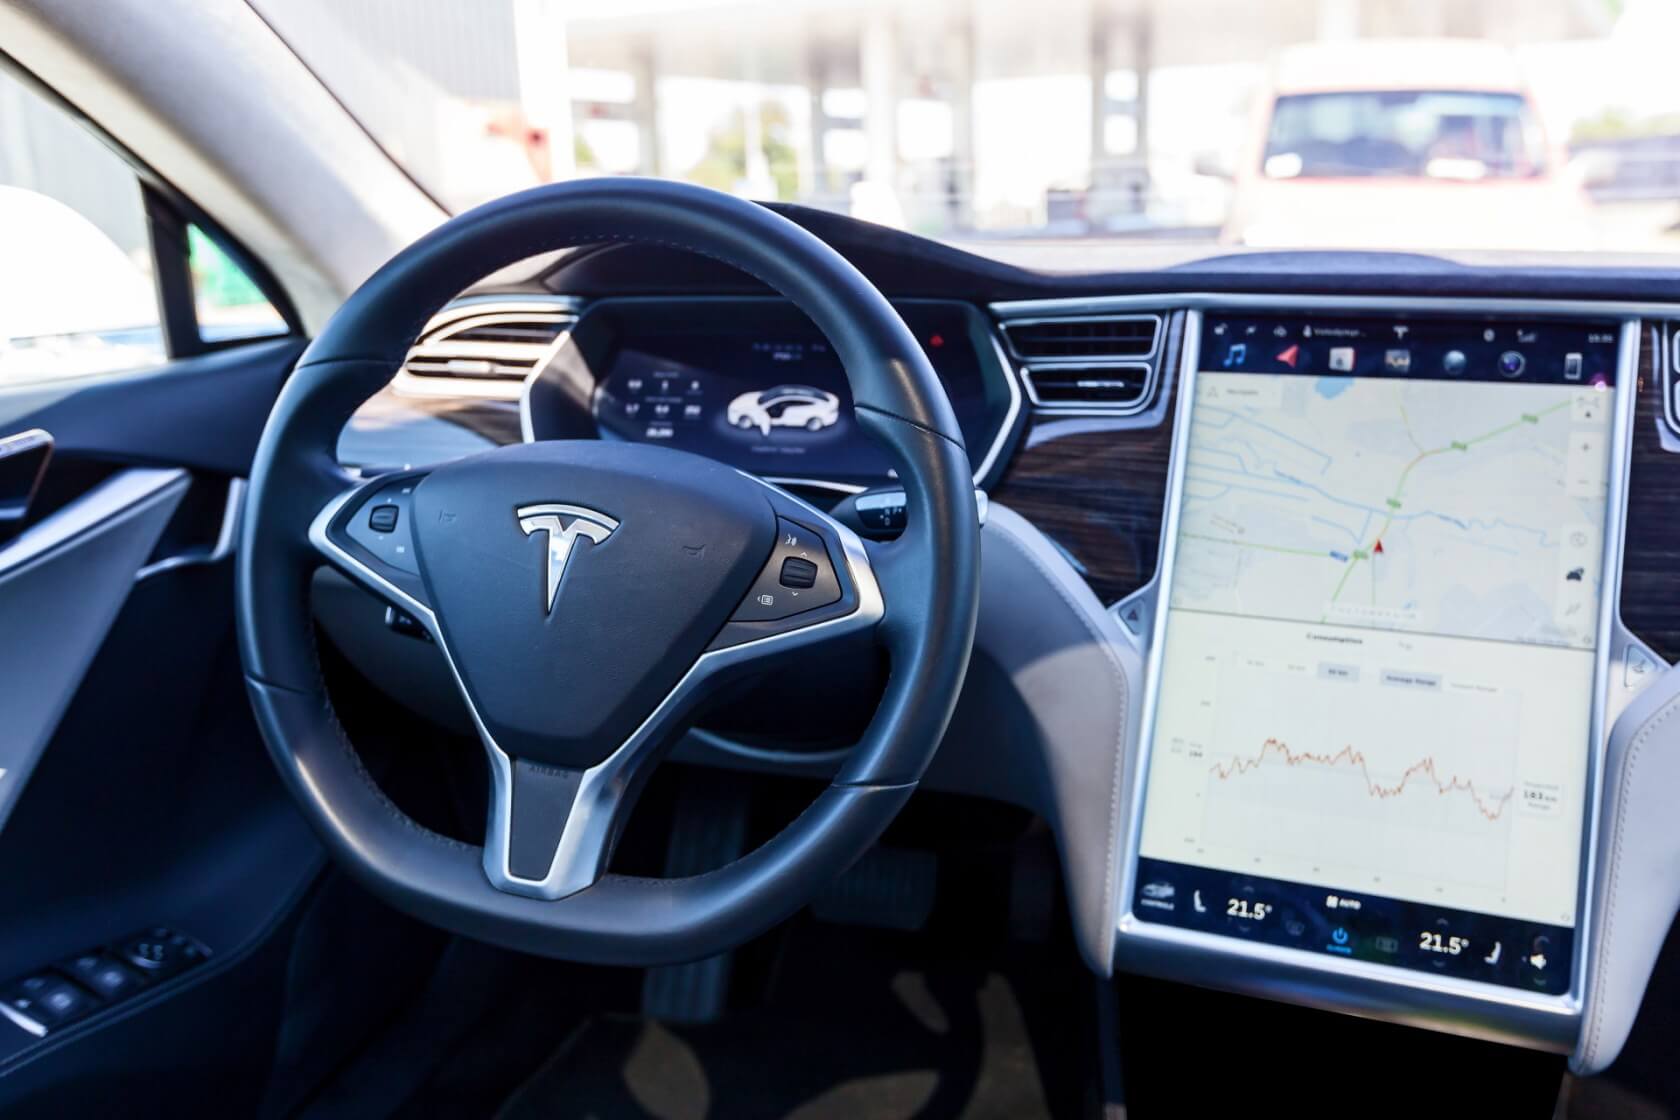 Tesla's latest update adds a full self-driving visualization preview, better voice commands, and more